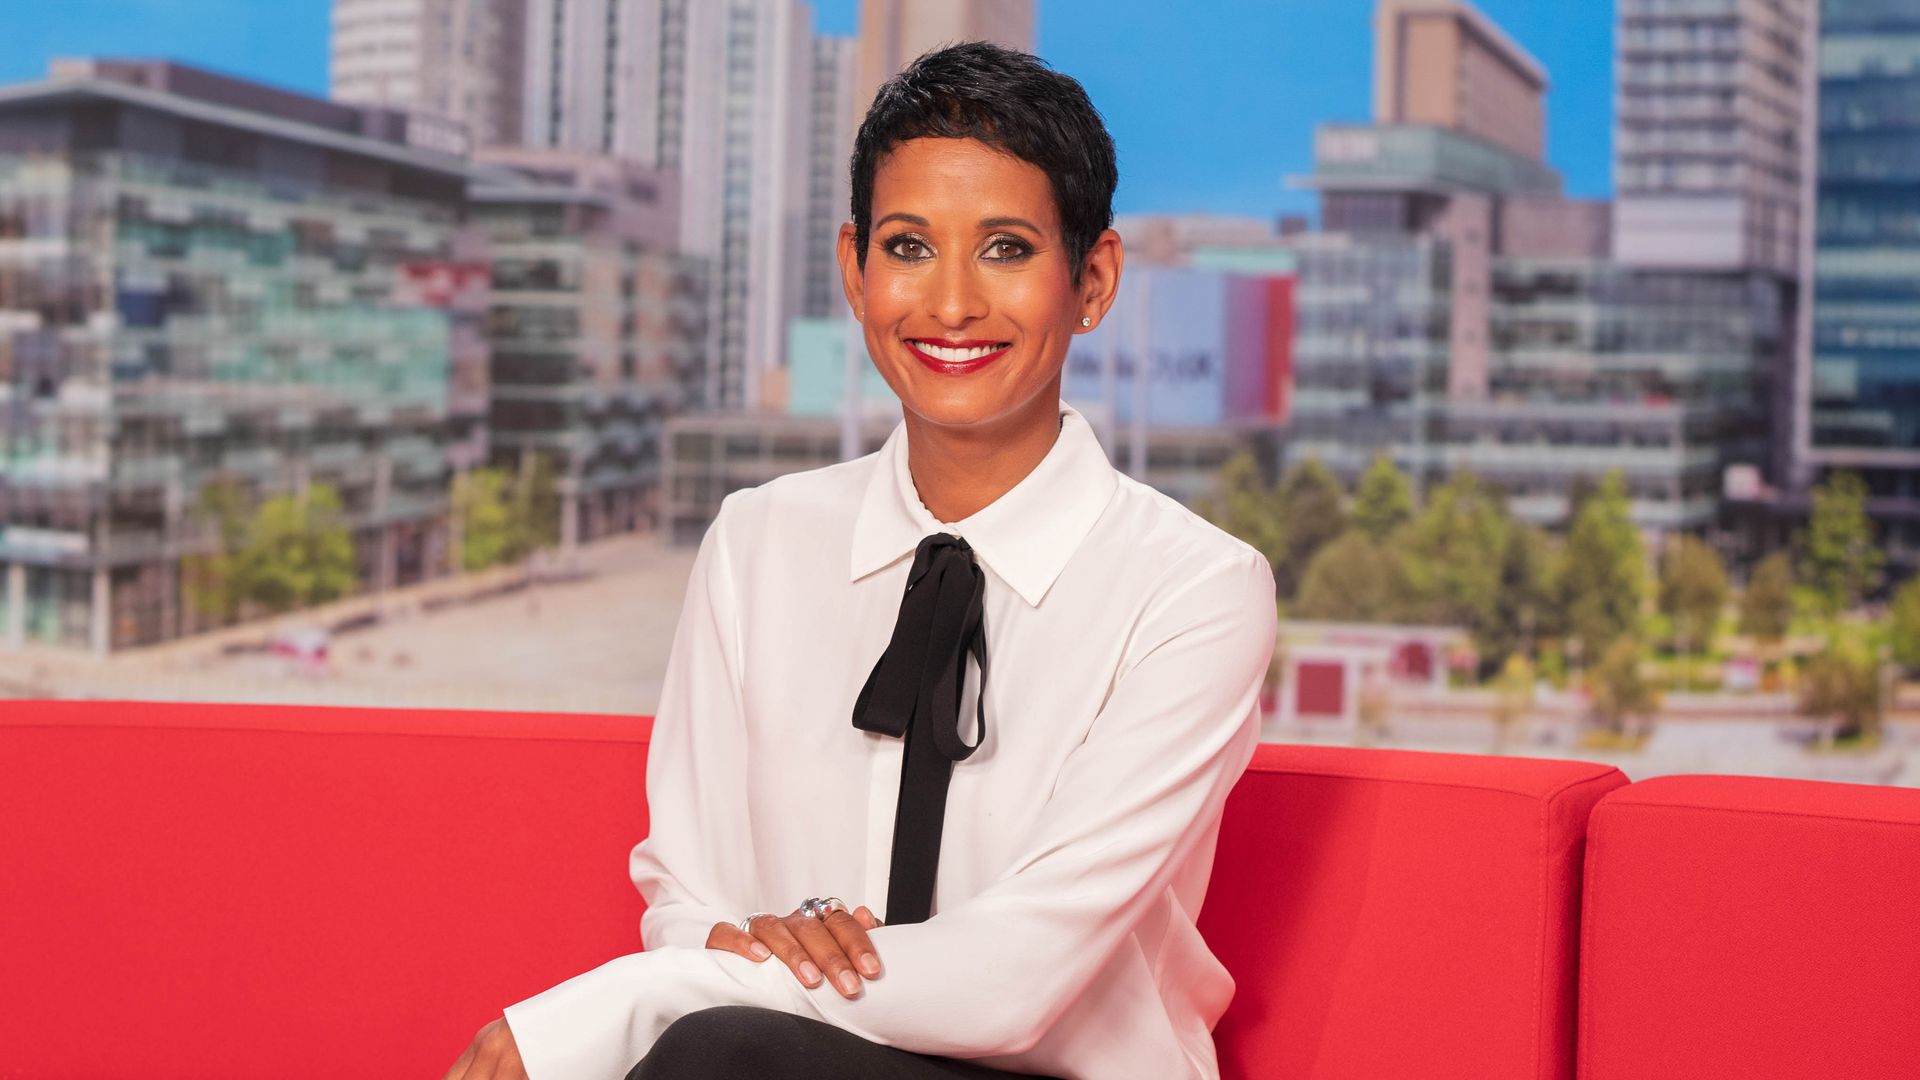 BBC Breakfast's Naga Munchetty left 'limping' after 'very bad' foot injury – details